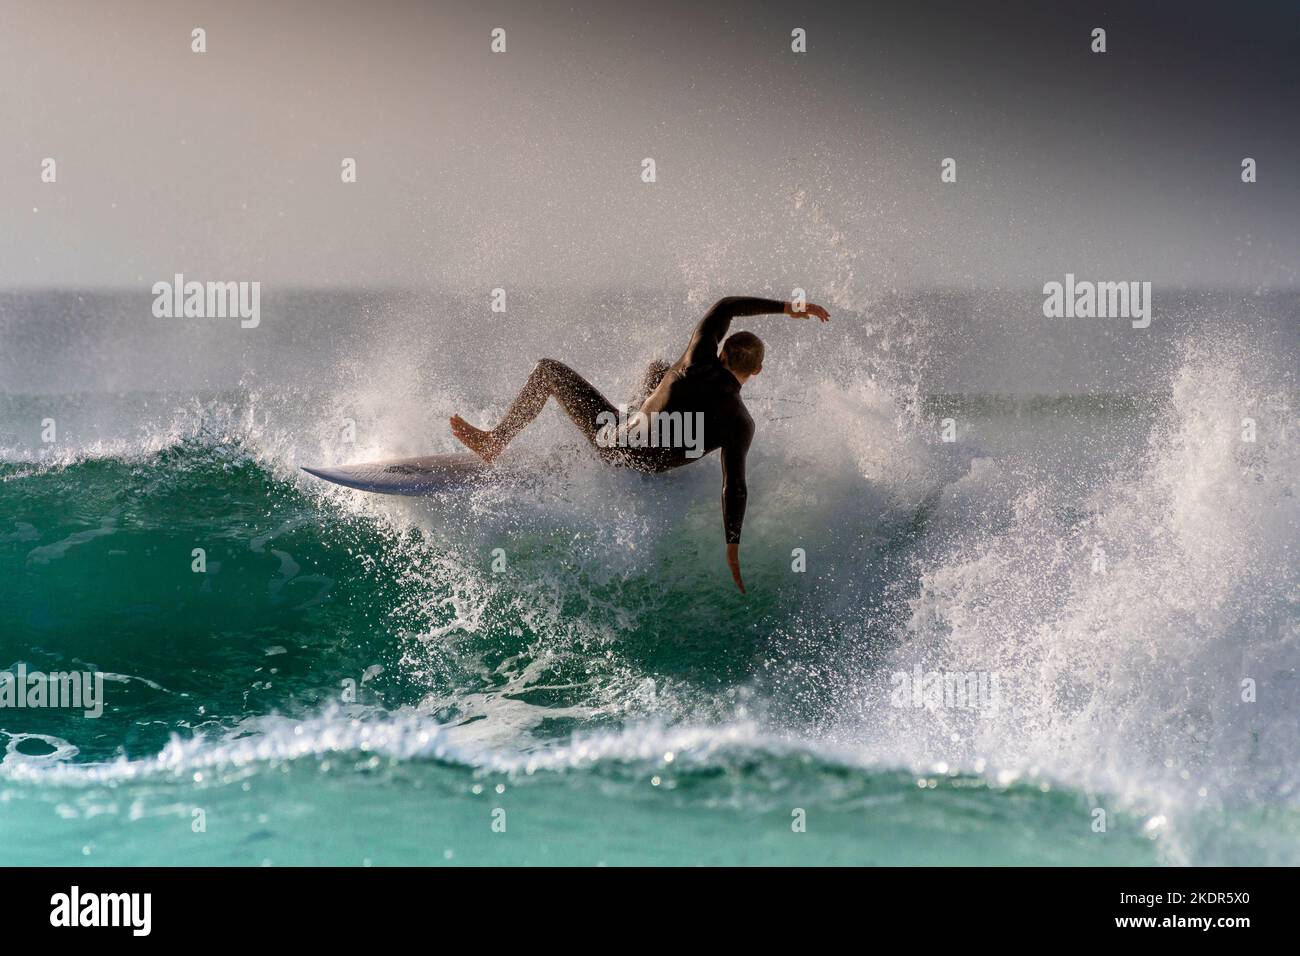 Spectaular surfing action as a male surfer wipes out as he rides a wave at Fistral in Newquay in Cornwall in England in the UK. Stock Photo